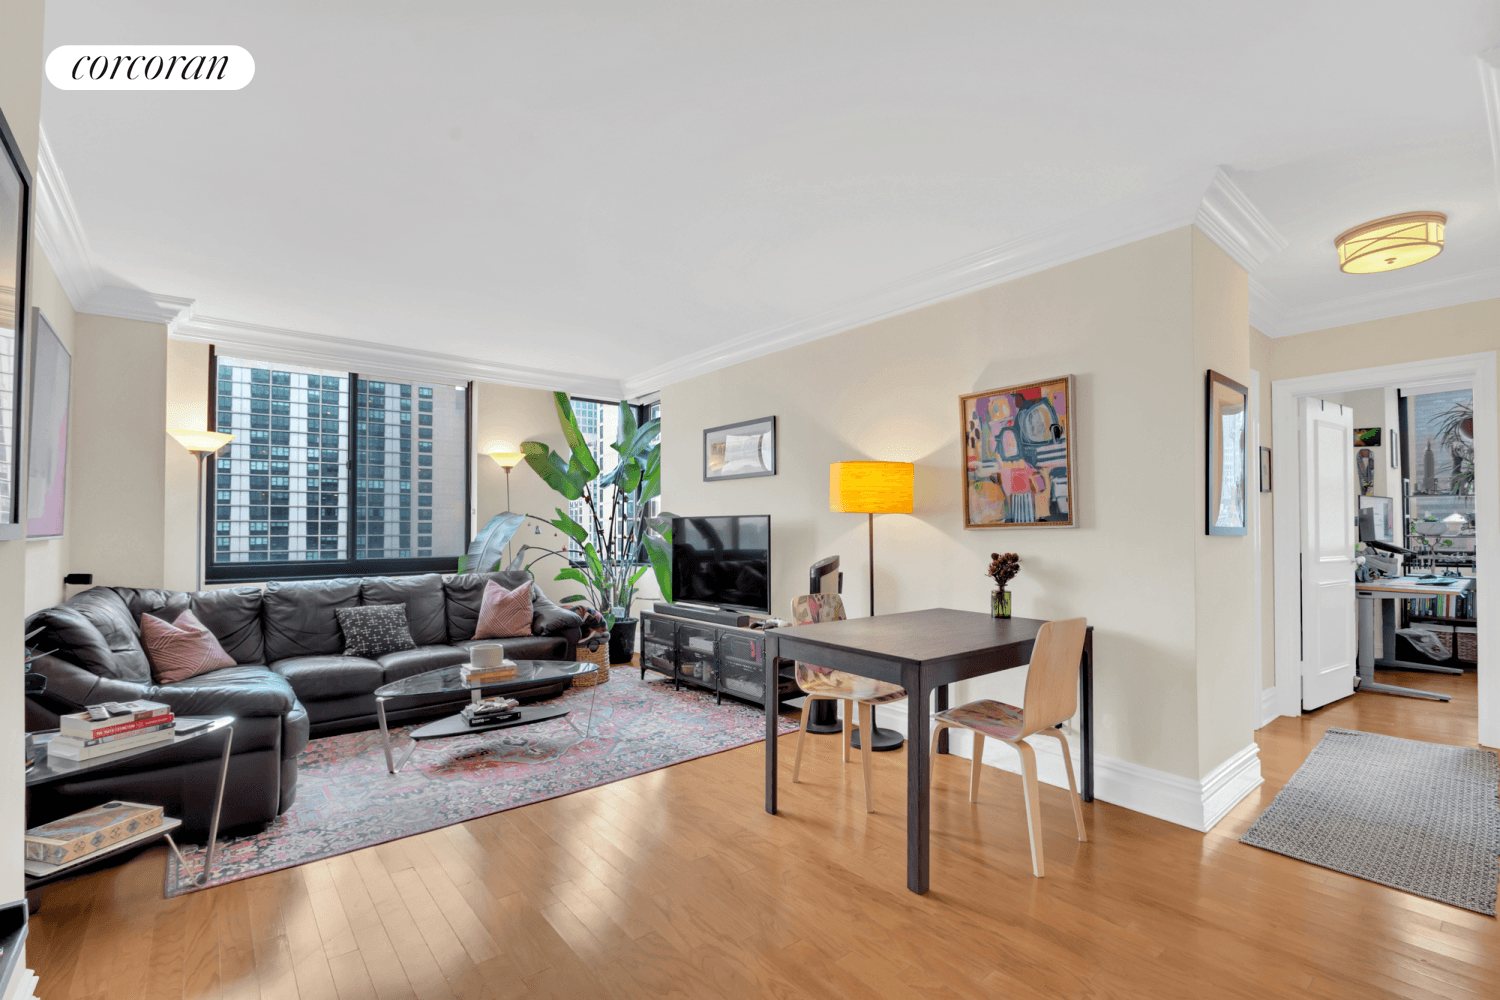 Luxury waterfront living in beautiful Battery Park City.